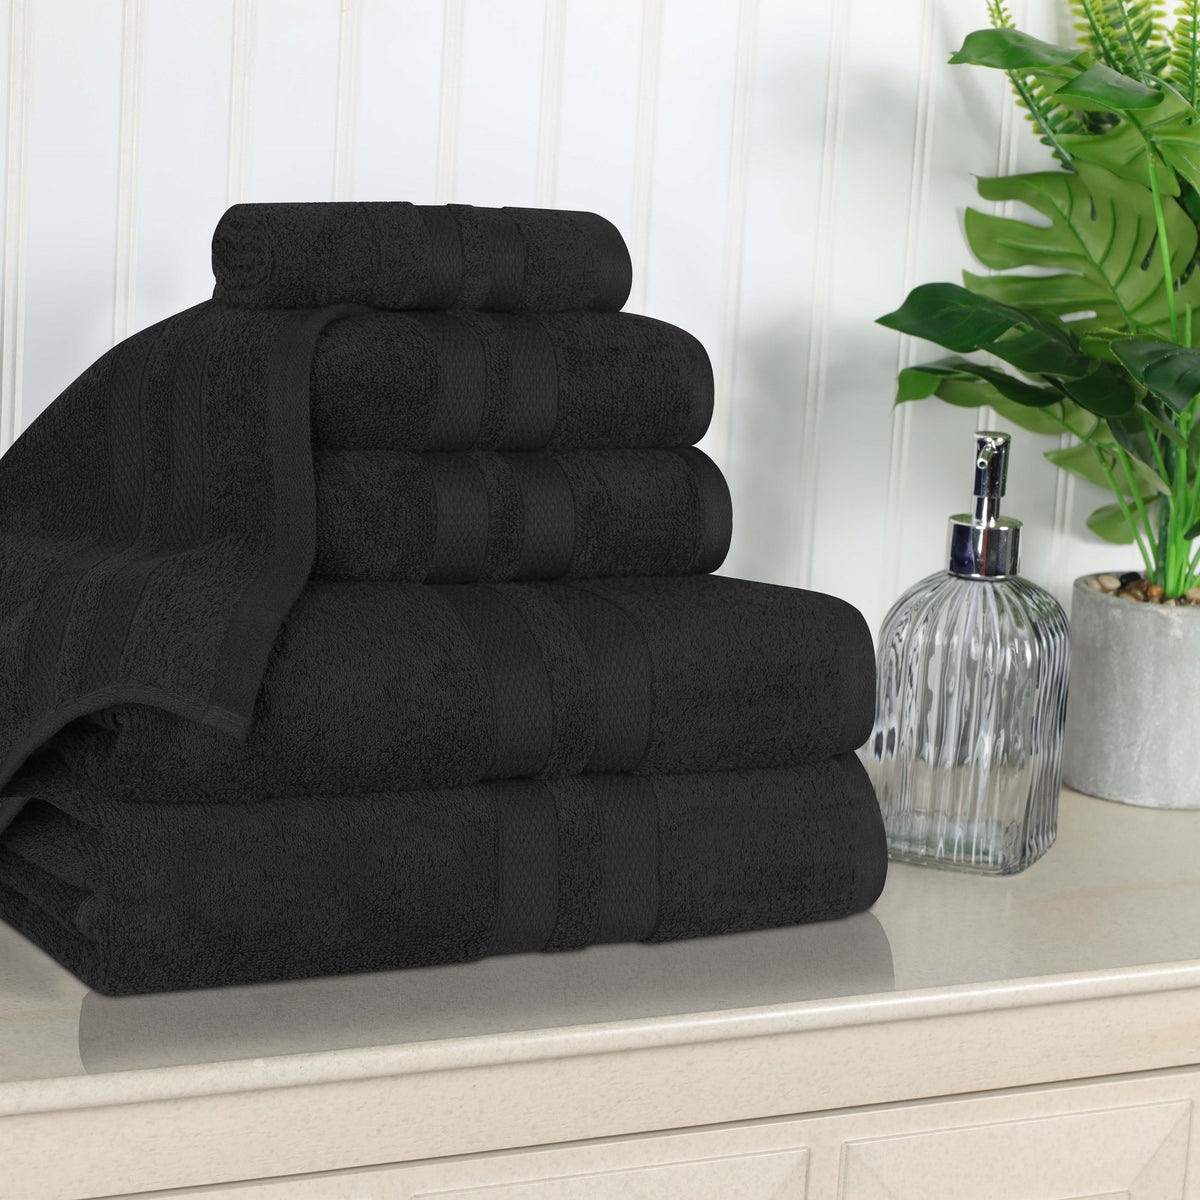 Superior Ultra Soft Cotton Absorbent Solid Assorted 6-Piece Towel Set